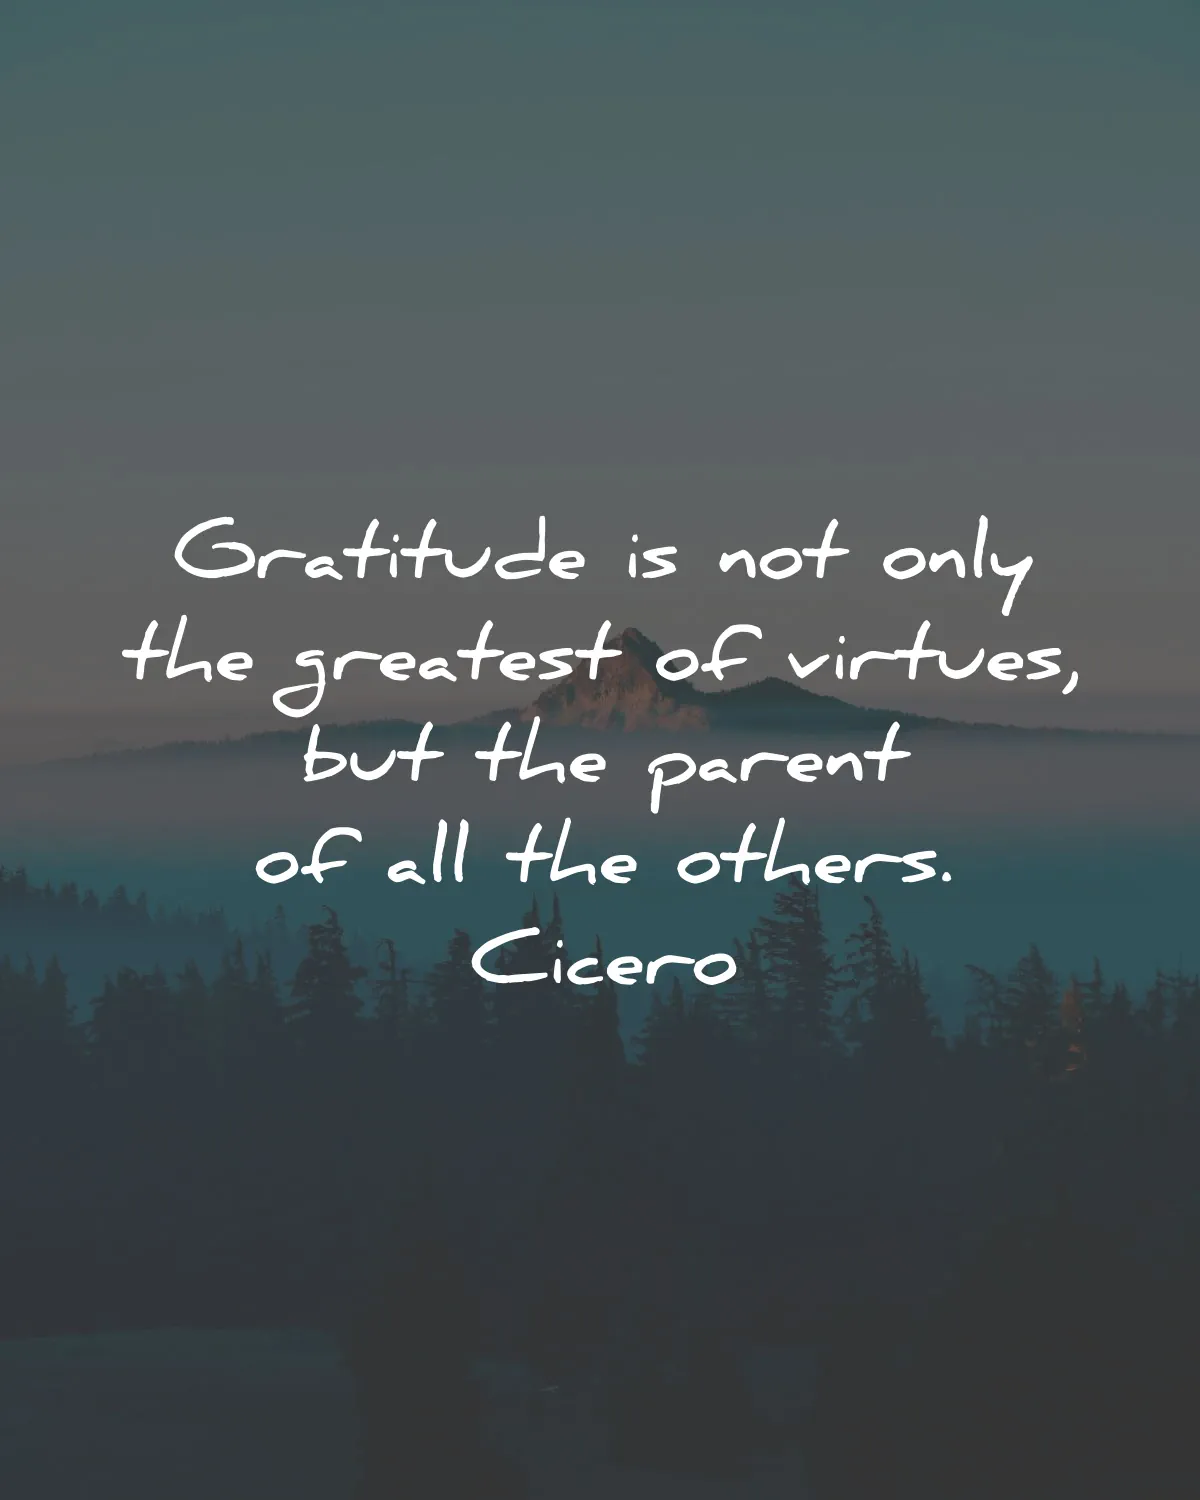 cicero quotes gratitude not only greatest virtues parent others wisdom